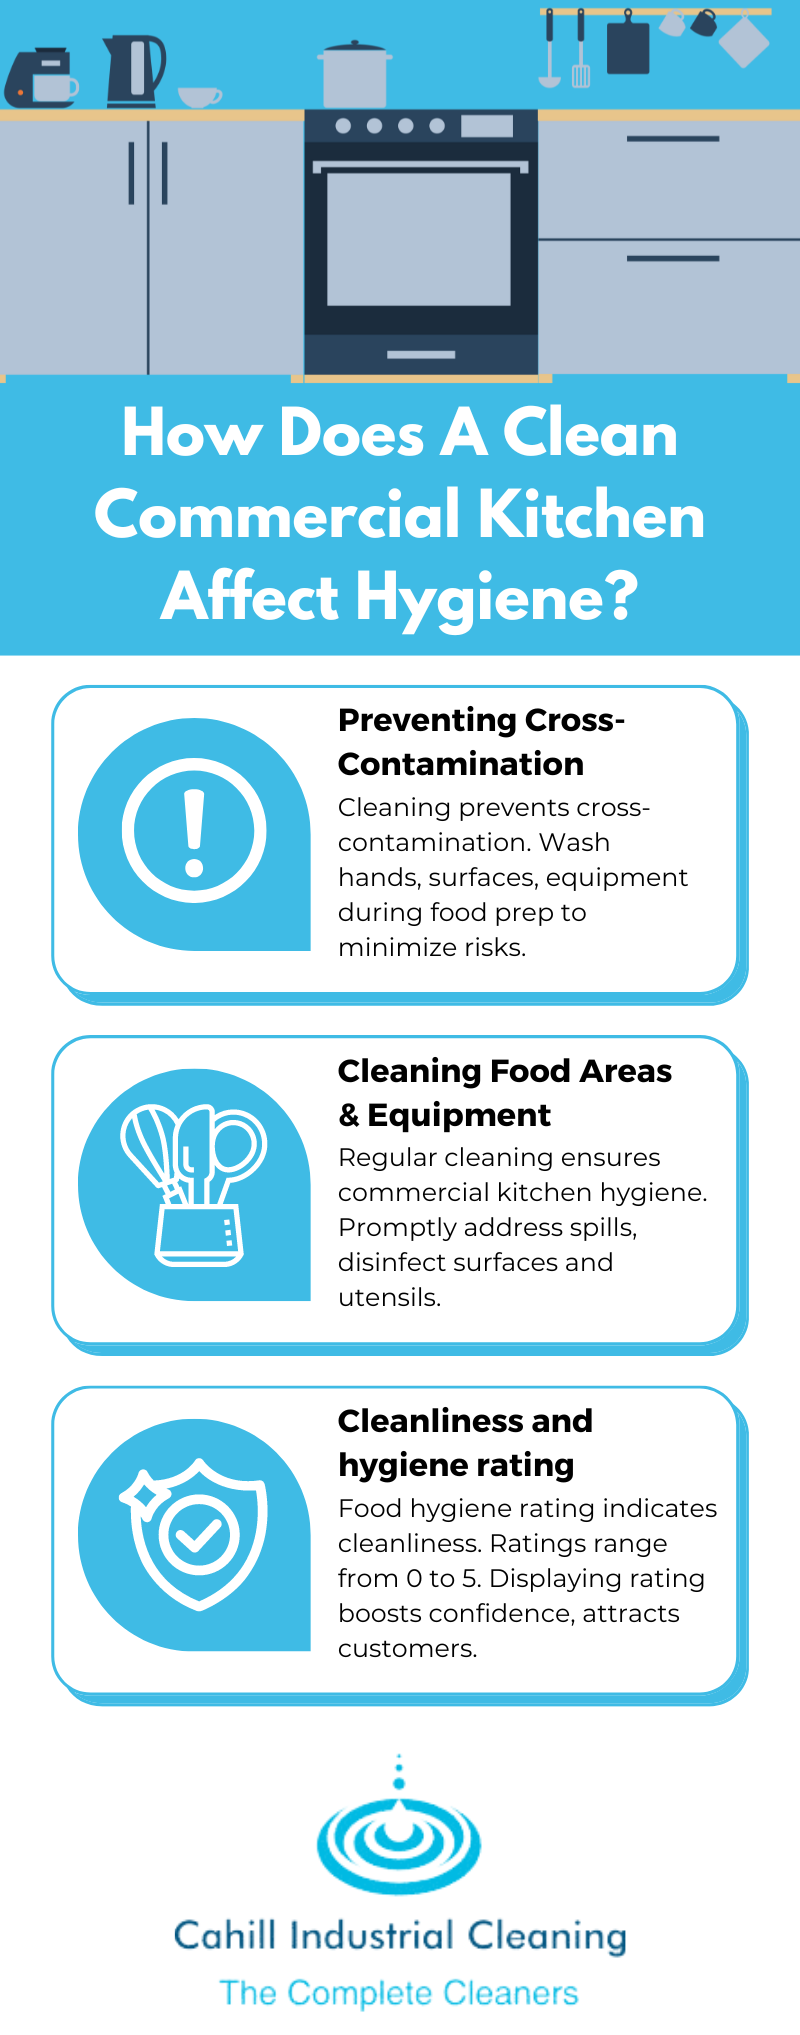 How Does A Clean Commercial Kitchen Affect Hygiene?